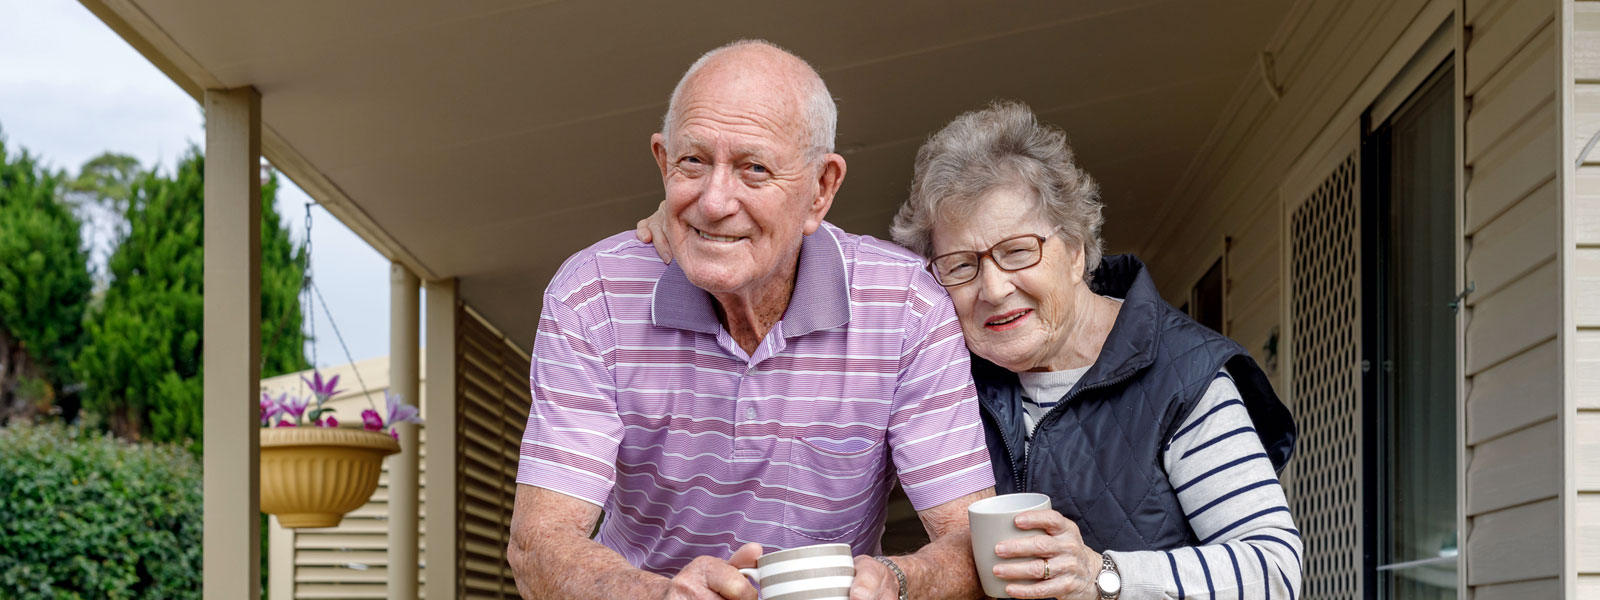 Photo of an elderly couple smiling for the camera